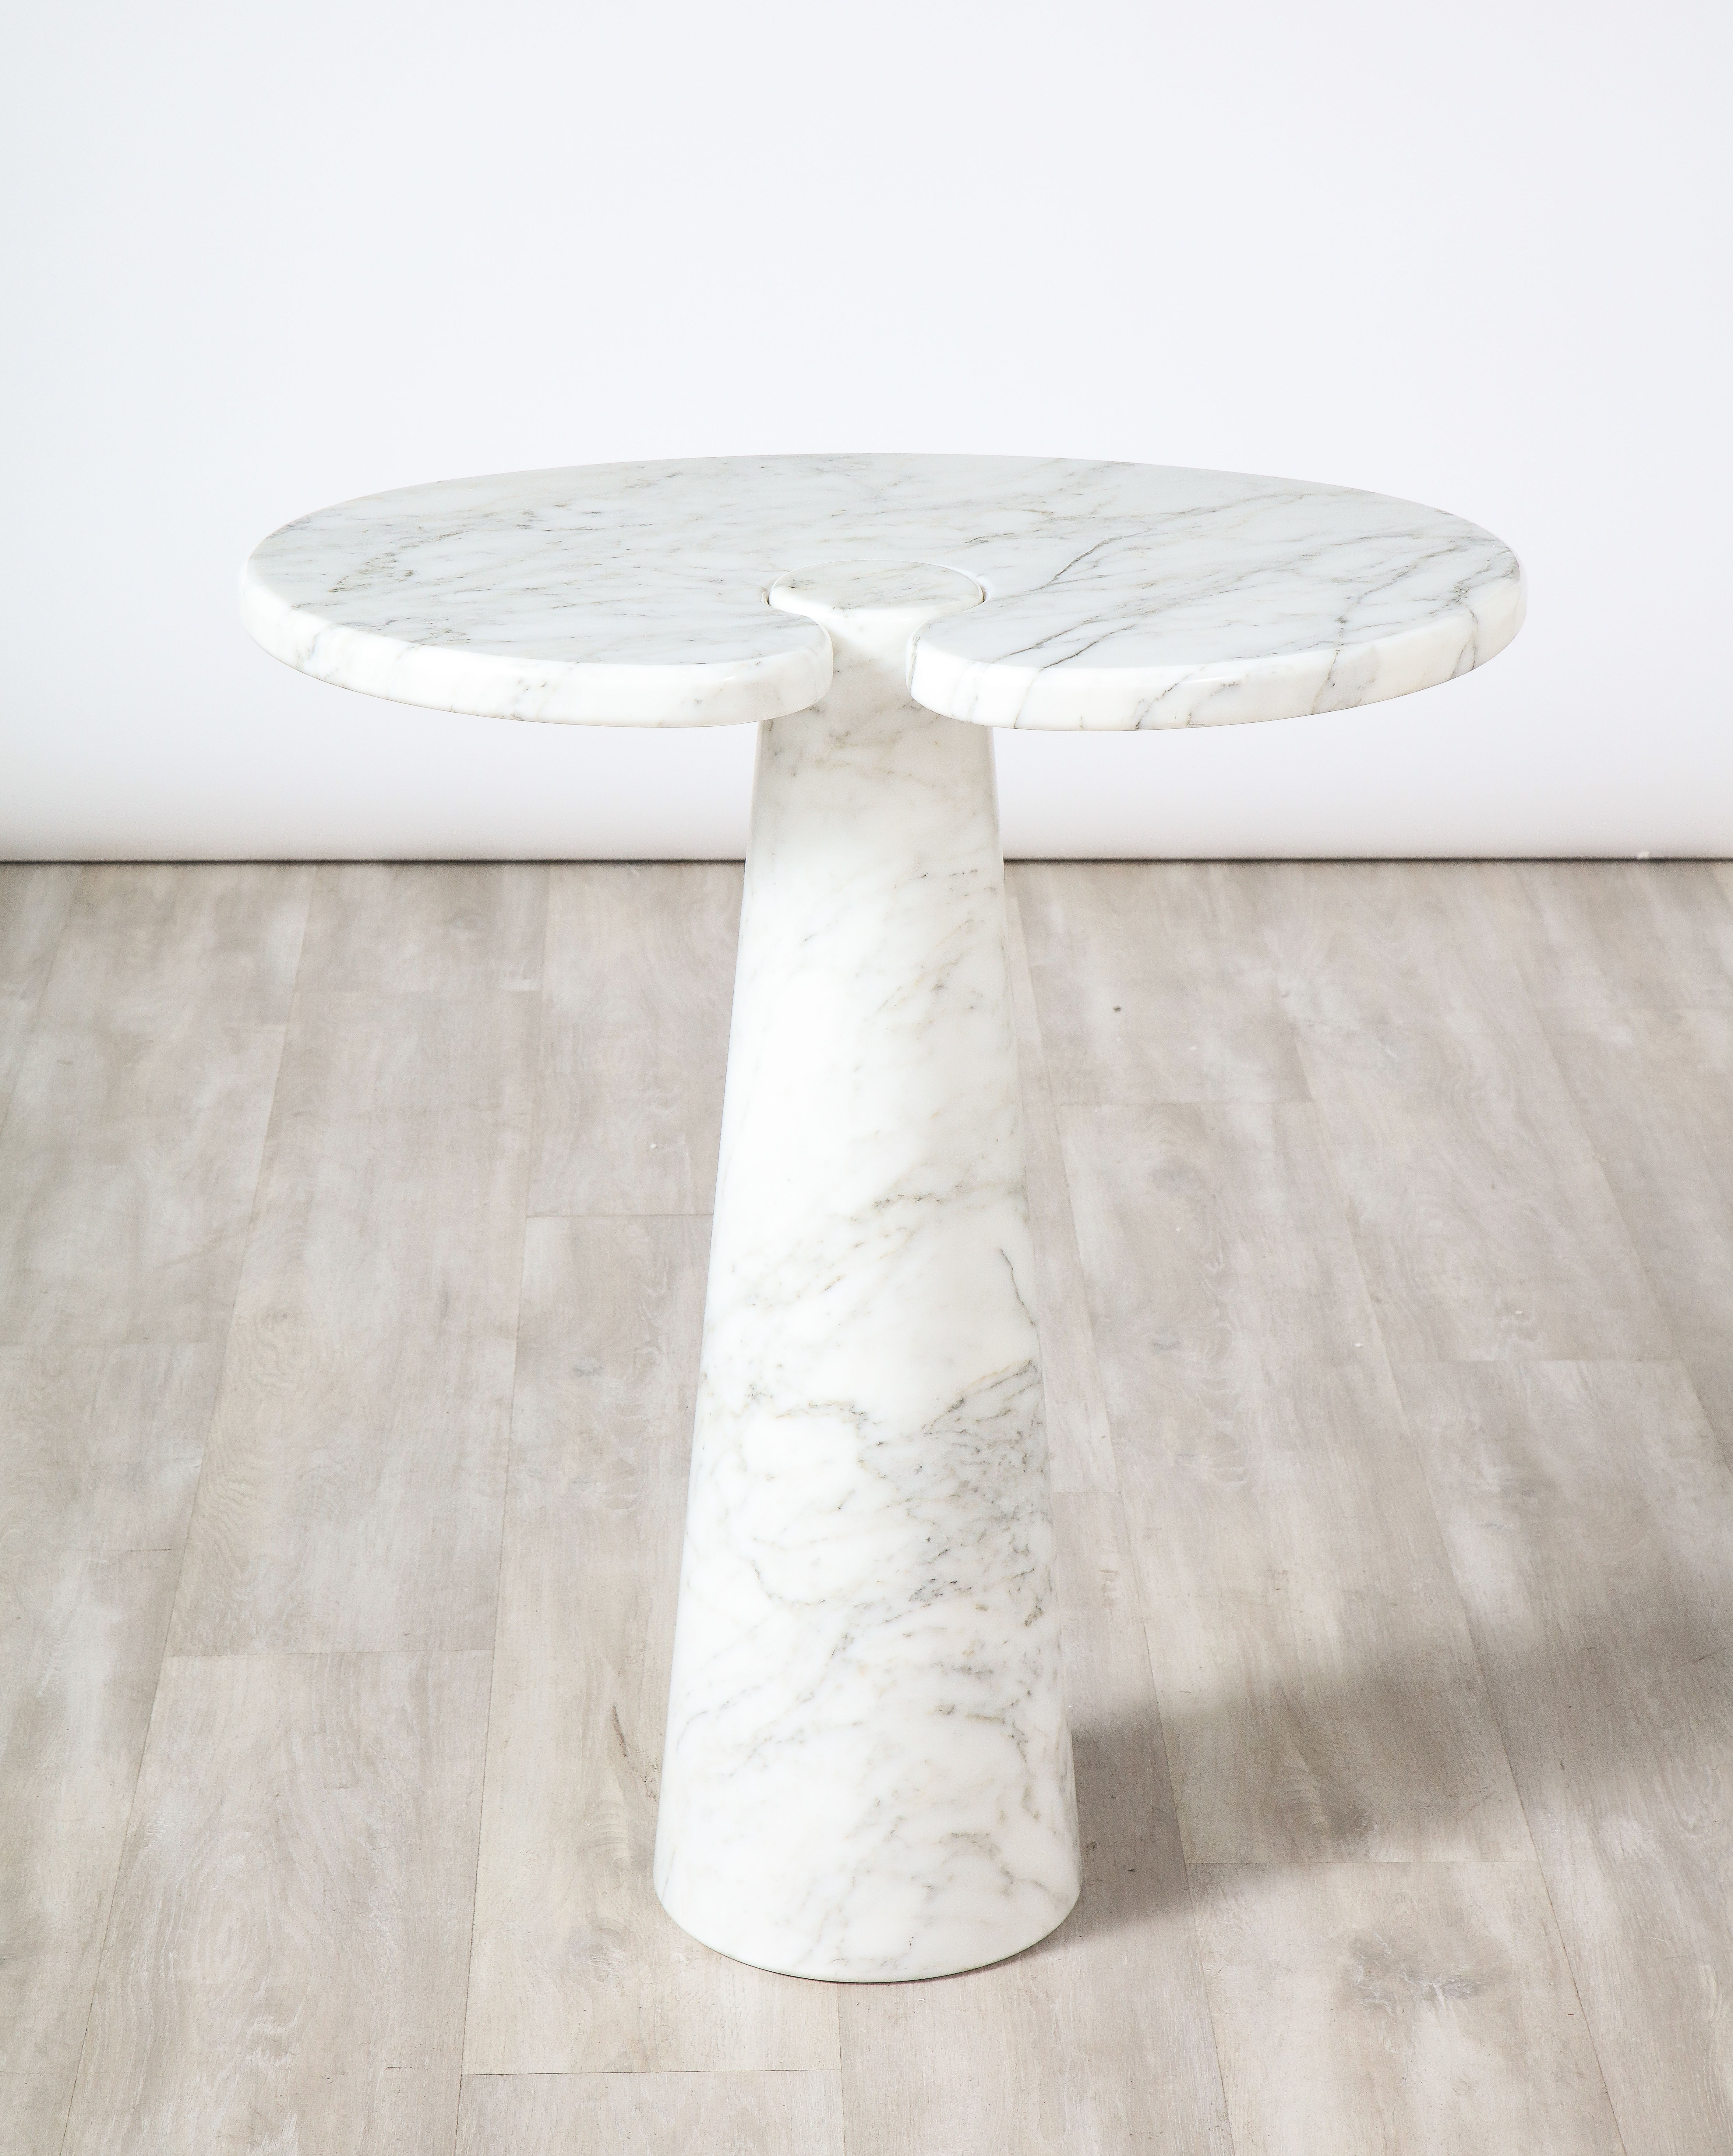 Angelo Mangiarotti for Skipper 'Eros' Series Carrara marble tall side table, 1971. Designed by Angelo Mangiarotti for Skipper, the 'Eros' series, this iconic Carrara side table is supported on one conical leg base, with beautiful subtle veining